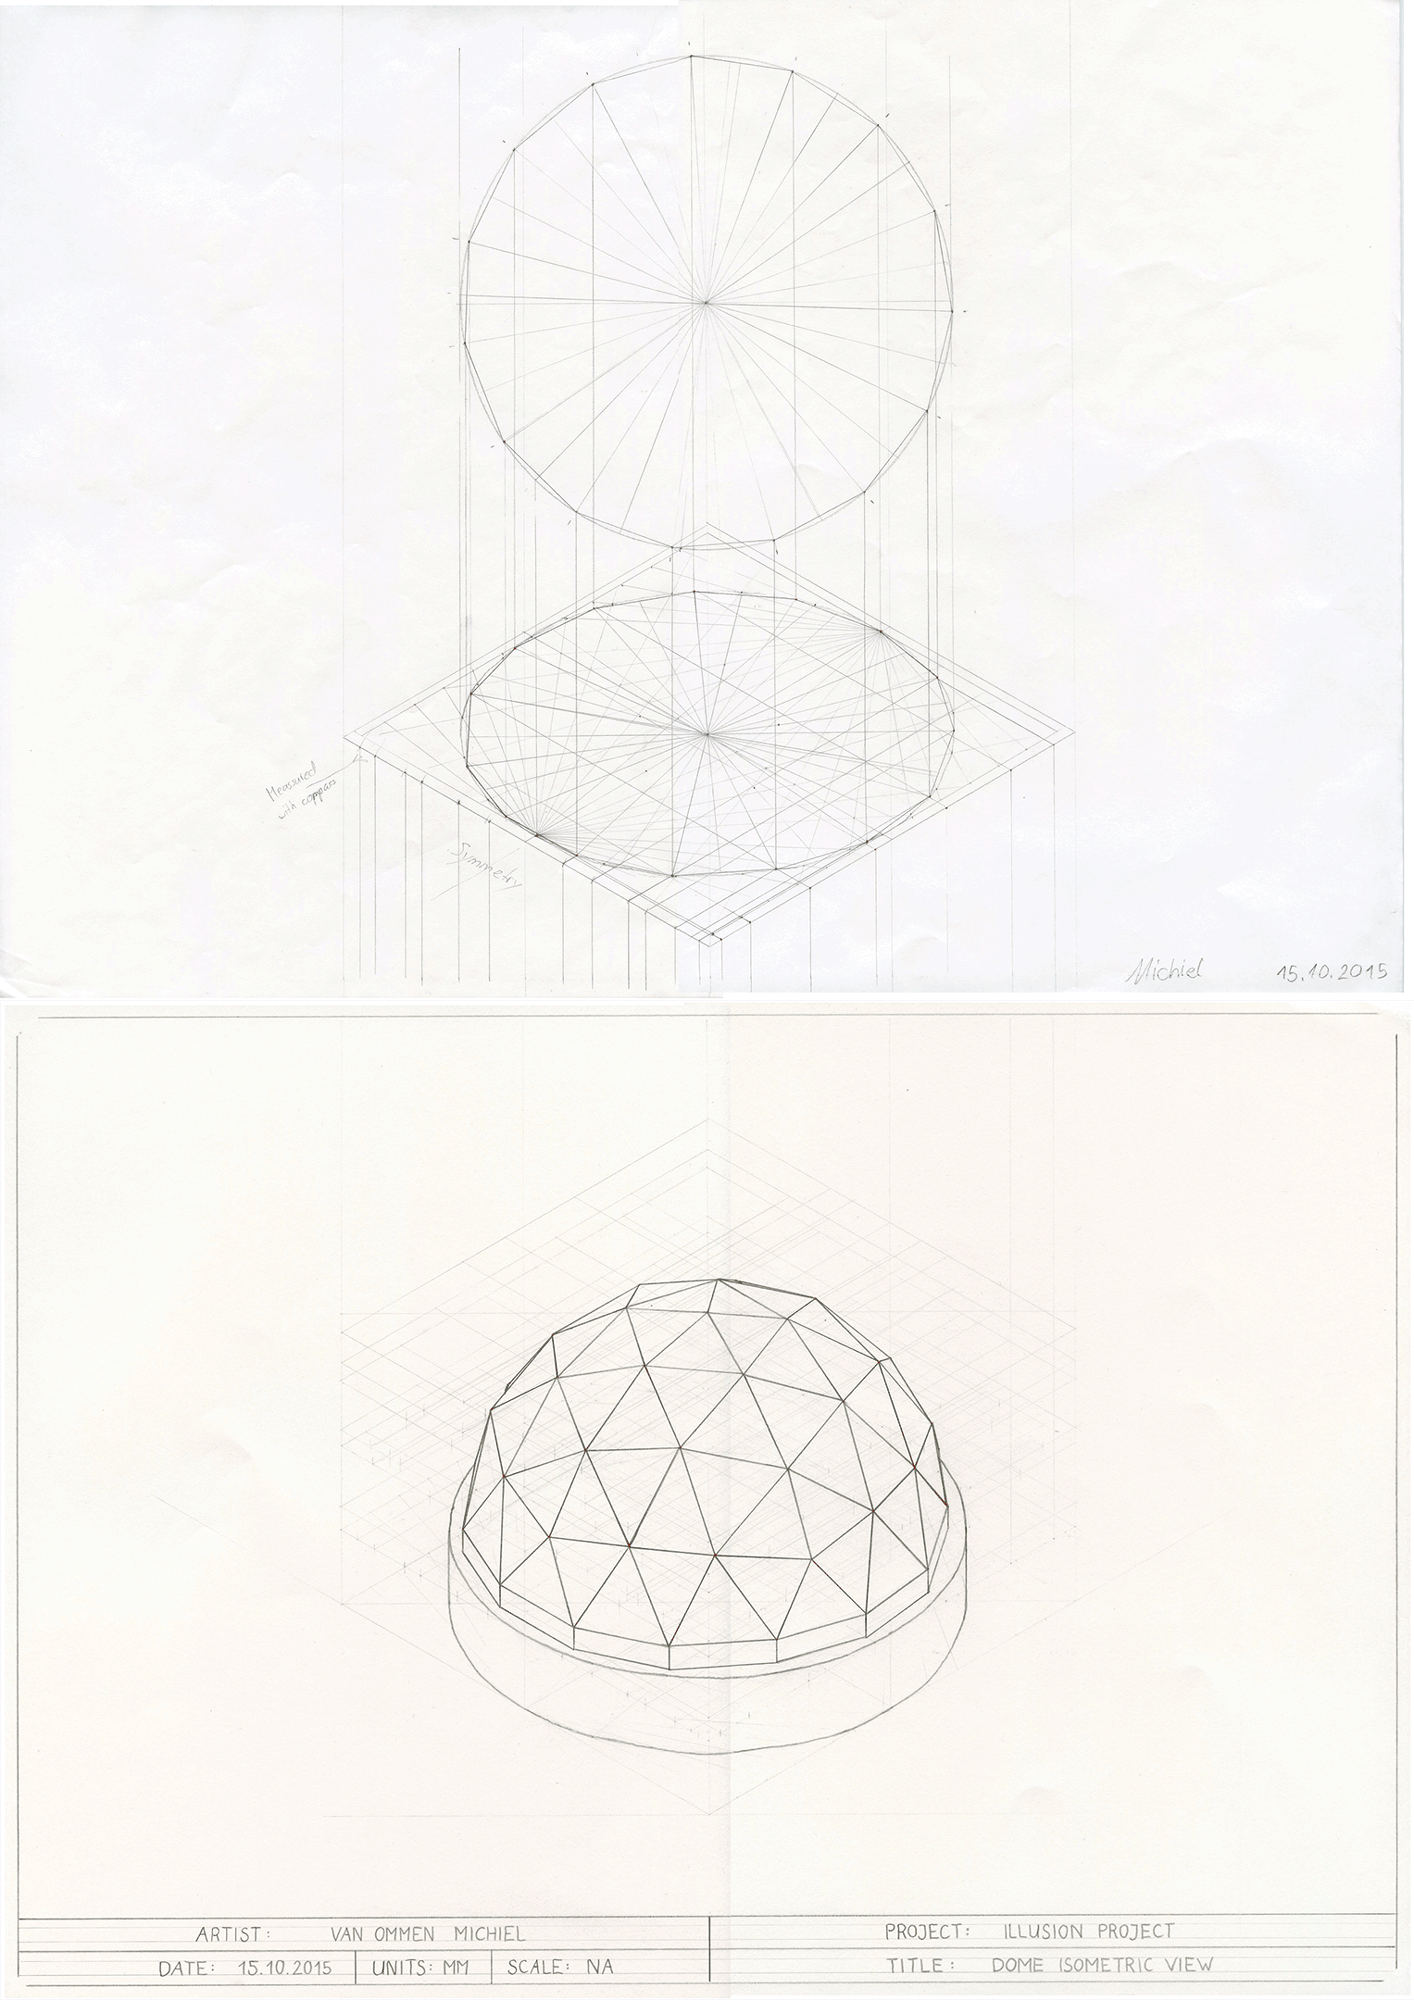 Construction of the dome in isometric